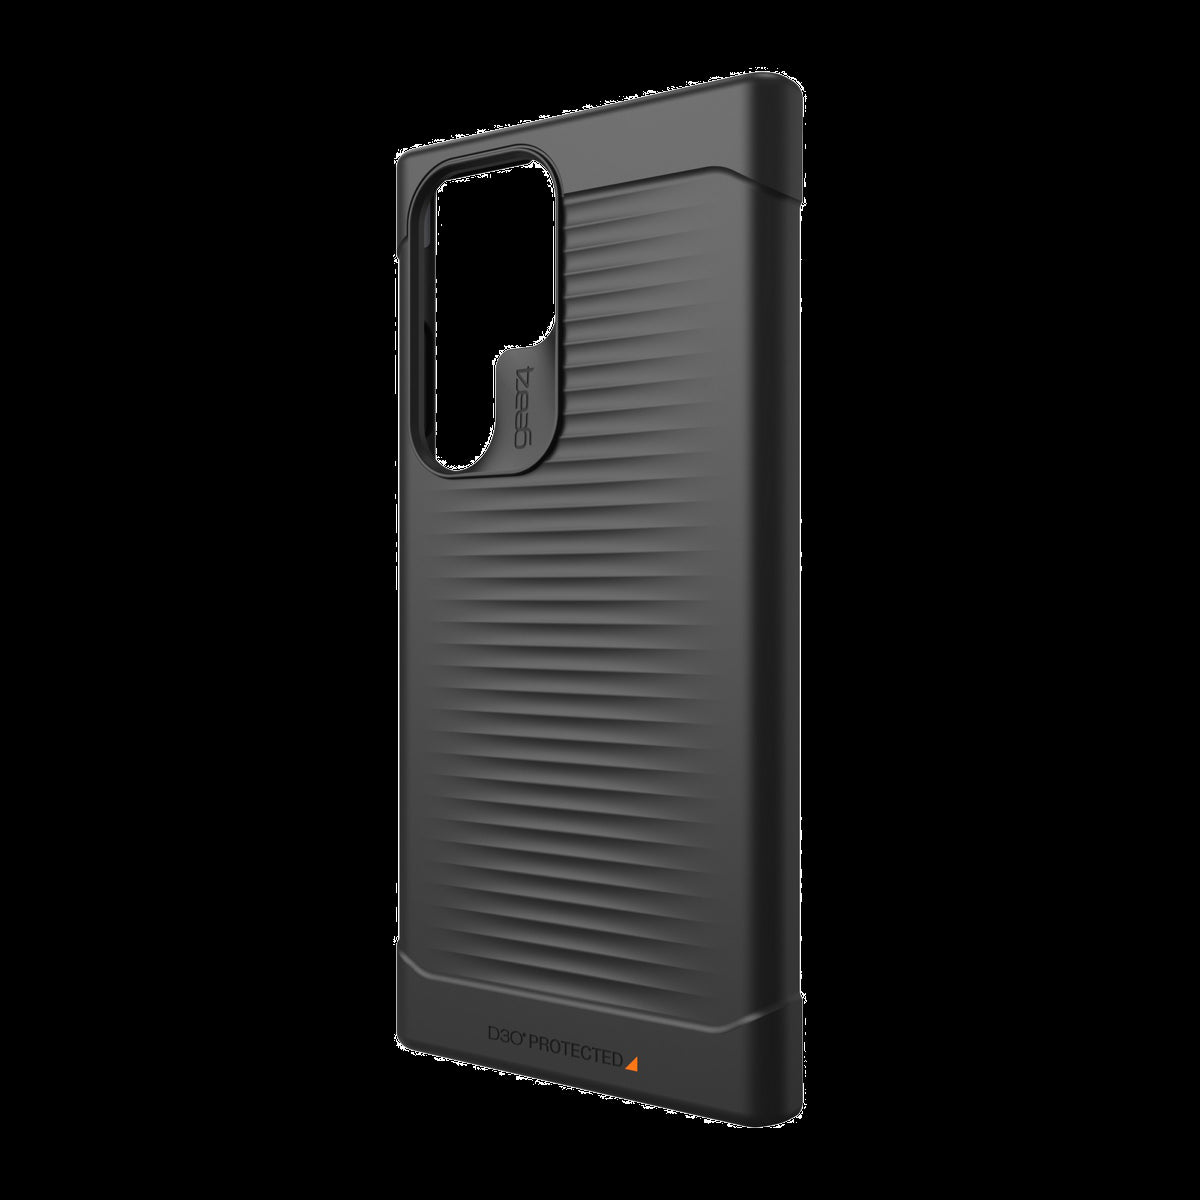 The Gear4 Havana case is a stylish, lightweight case that’ll deliver protection where it’s needed most.